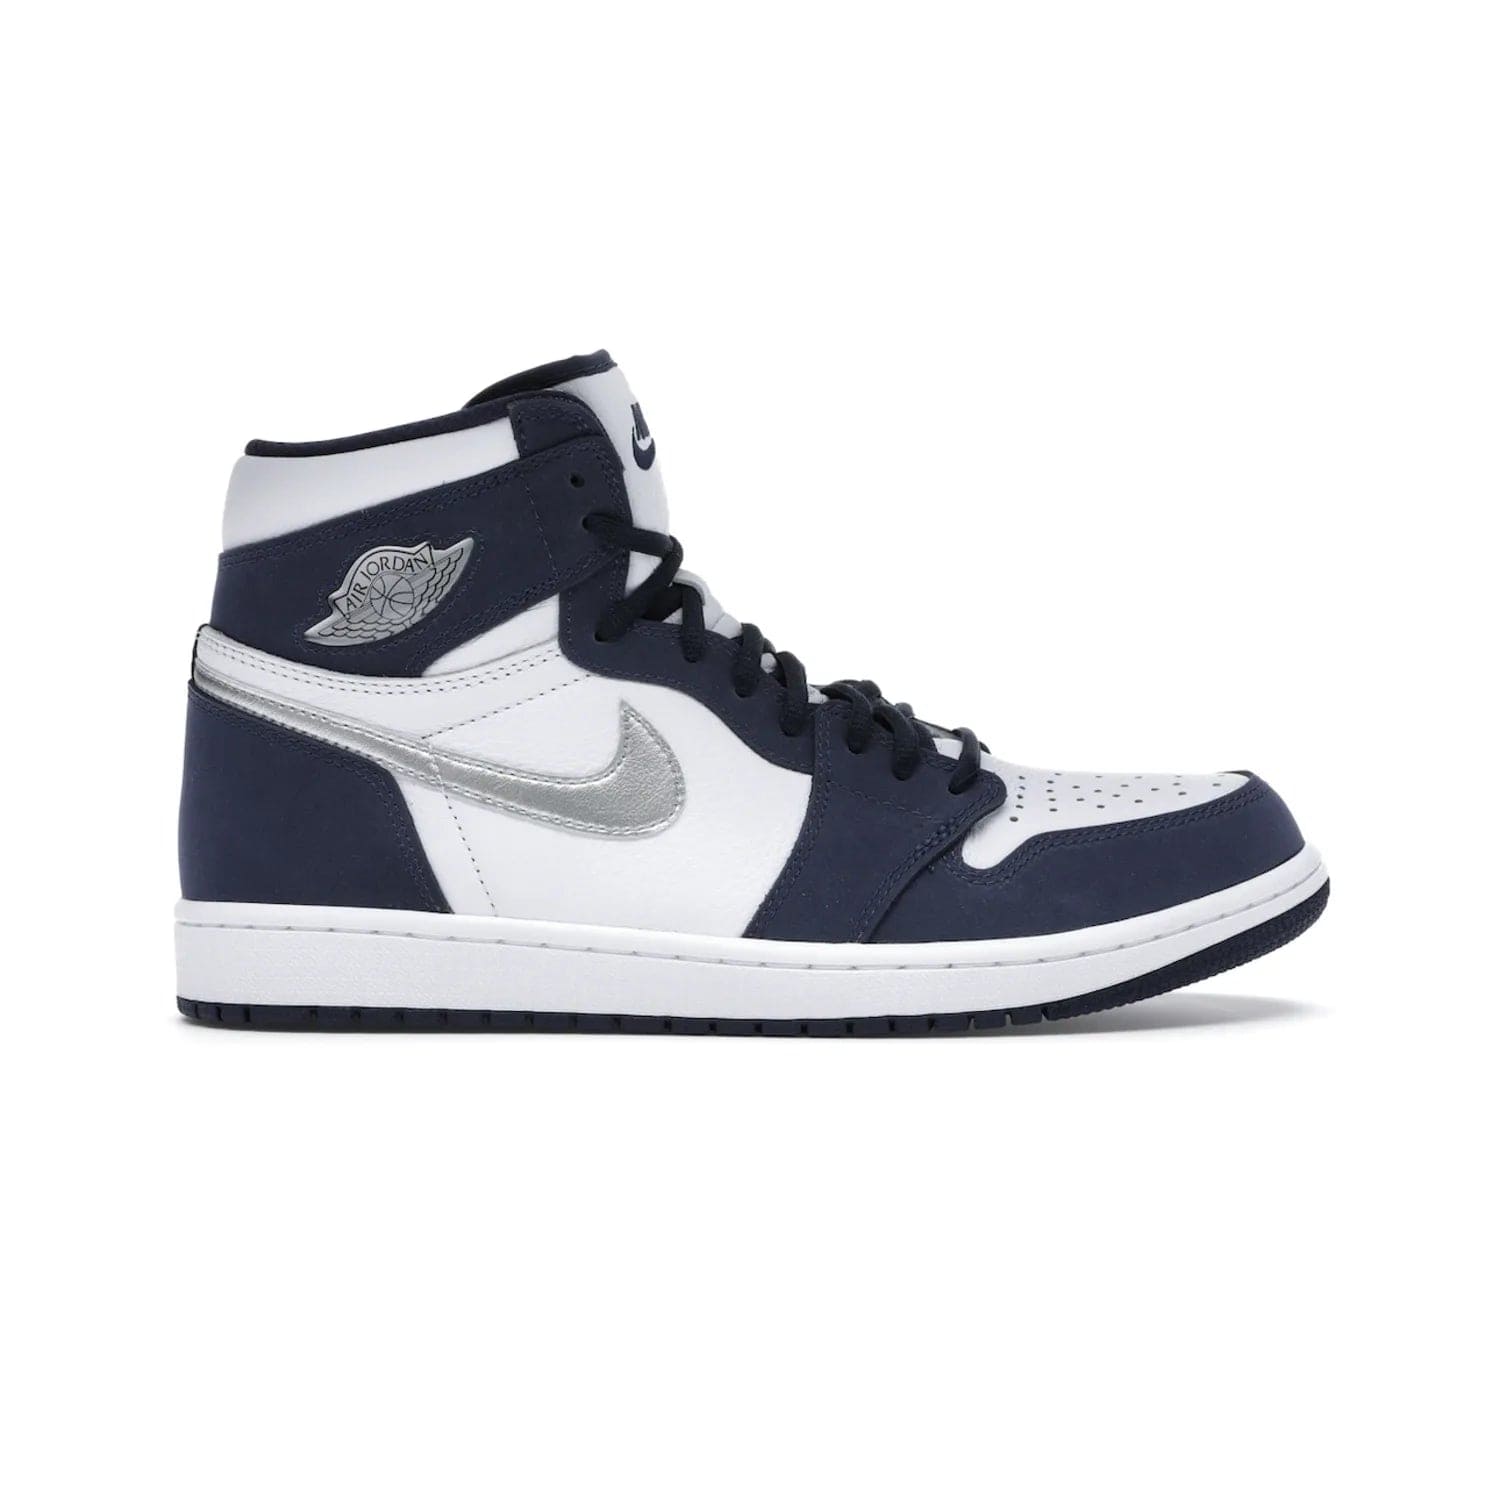 Jordan 1 Retro High COJP Midnight Navy (2020) - Image 1 - Only at www.BallersClubKickz.com - Air Jordan 1 Retro High COJP Midnight Navy - Iconic silhouette updated with a modern touch. Be ahead of the game with this timeless style. Get it now.